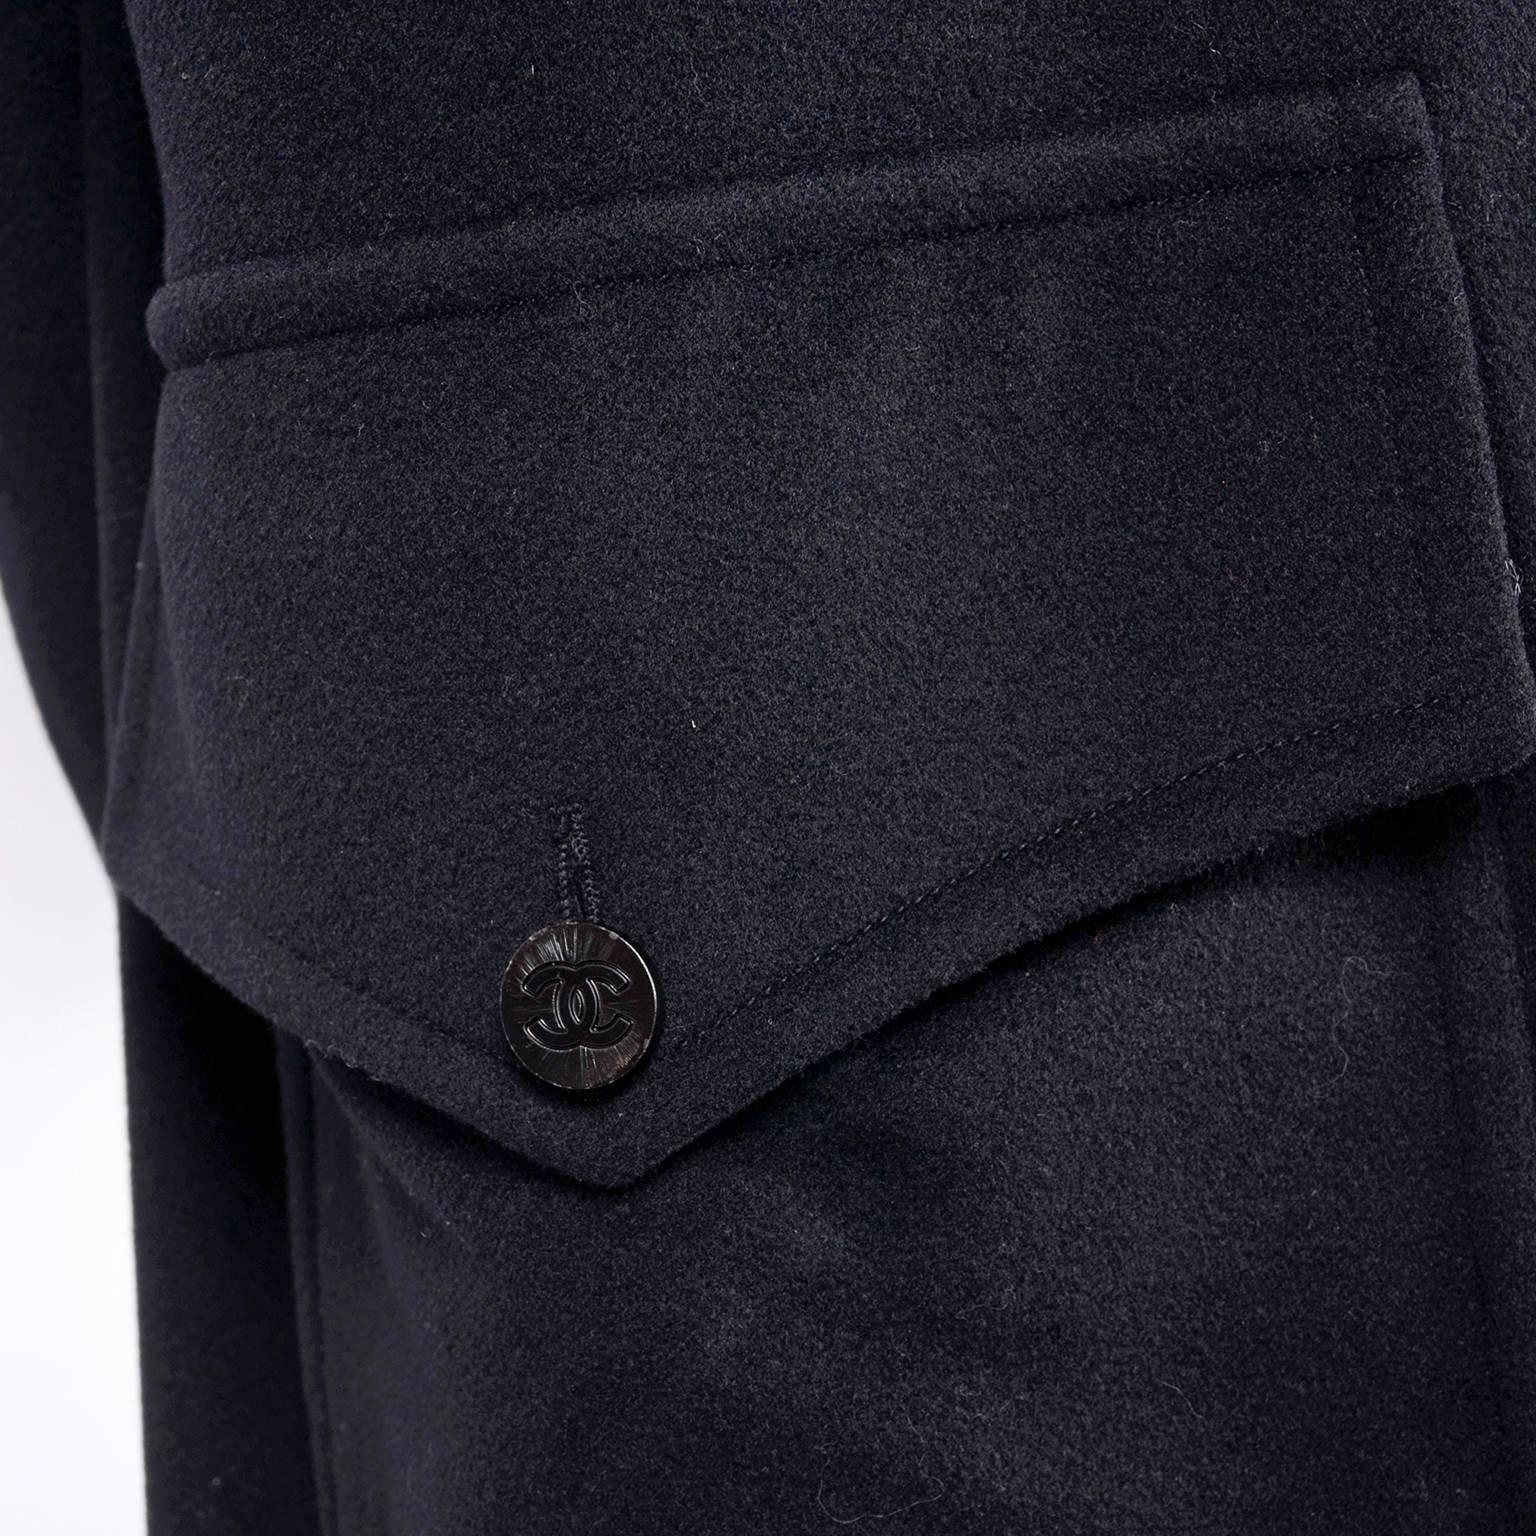 Black Chanel Wool and Cashmere Coat with CC Monogram Buttons, 1998 